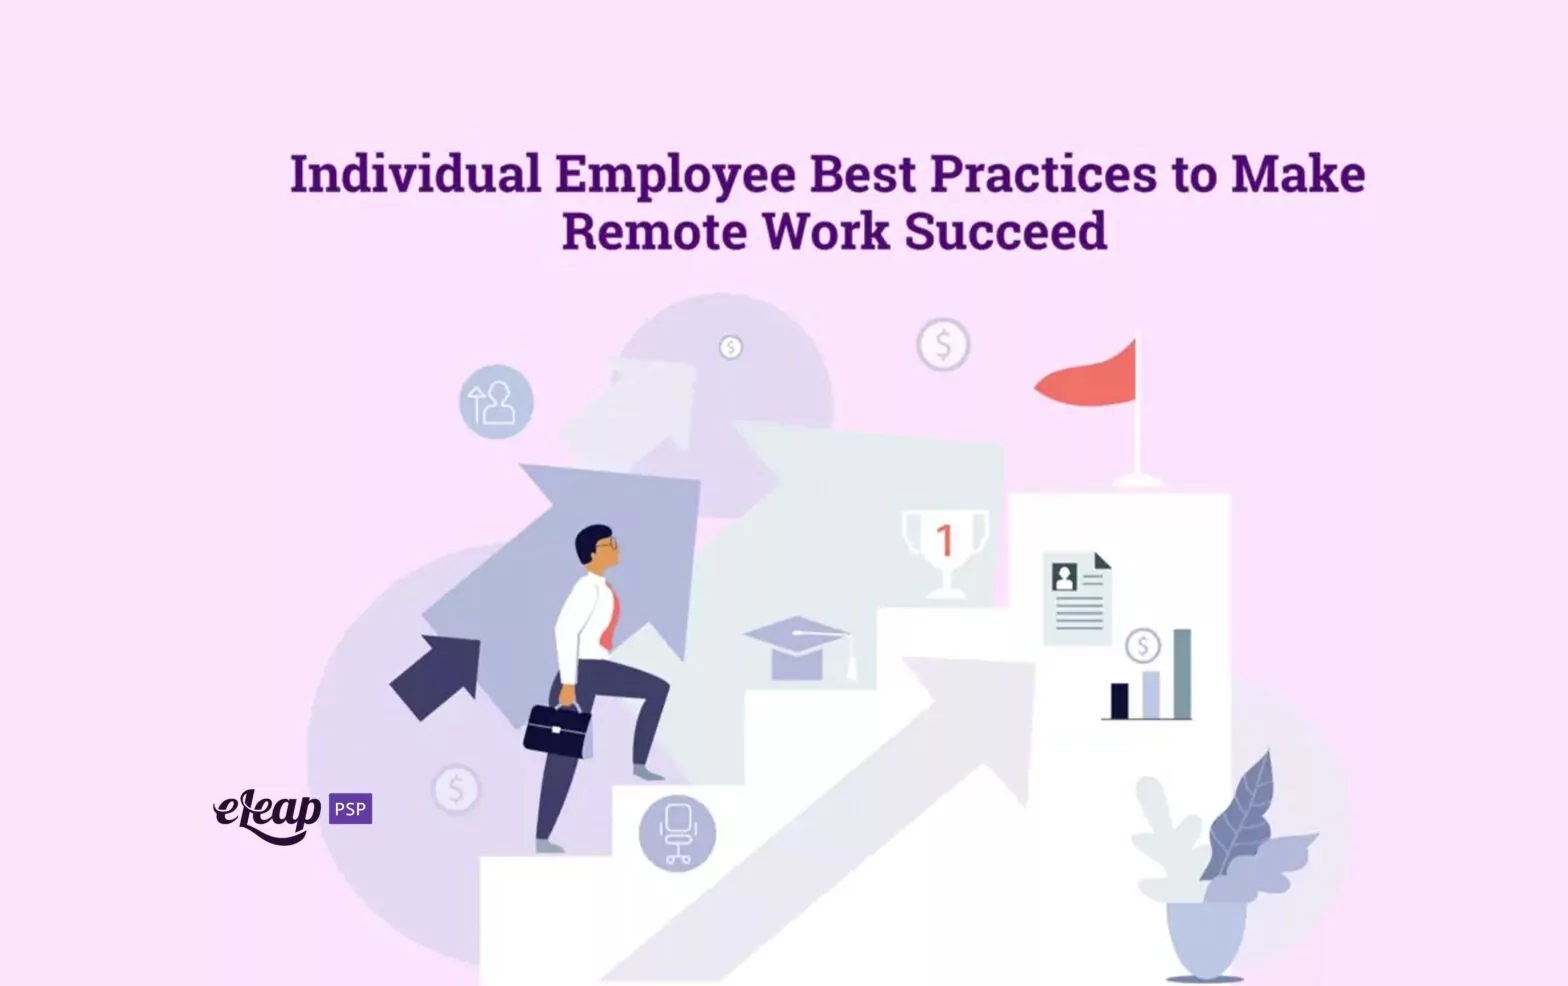 Individual Employee Best Practices to Make Remote Work Succeed